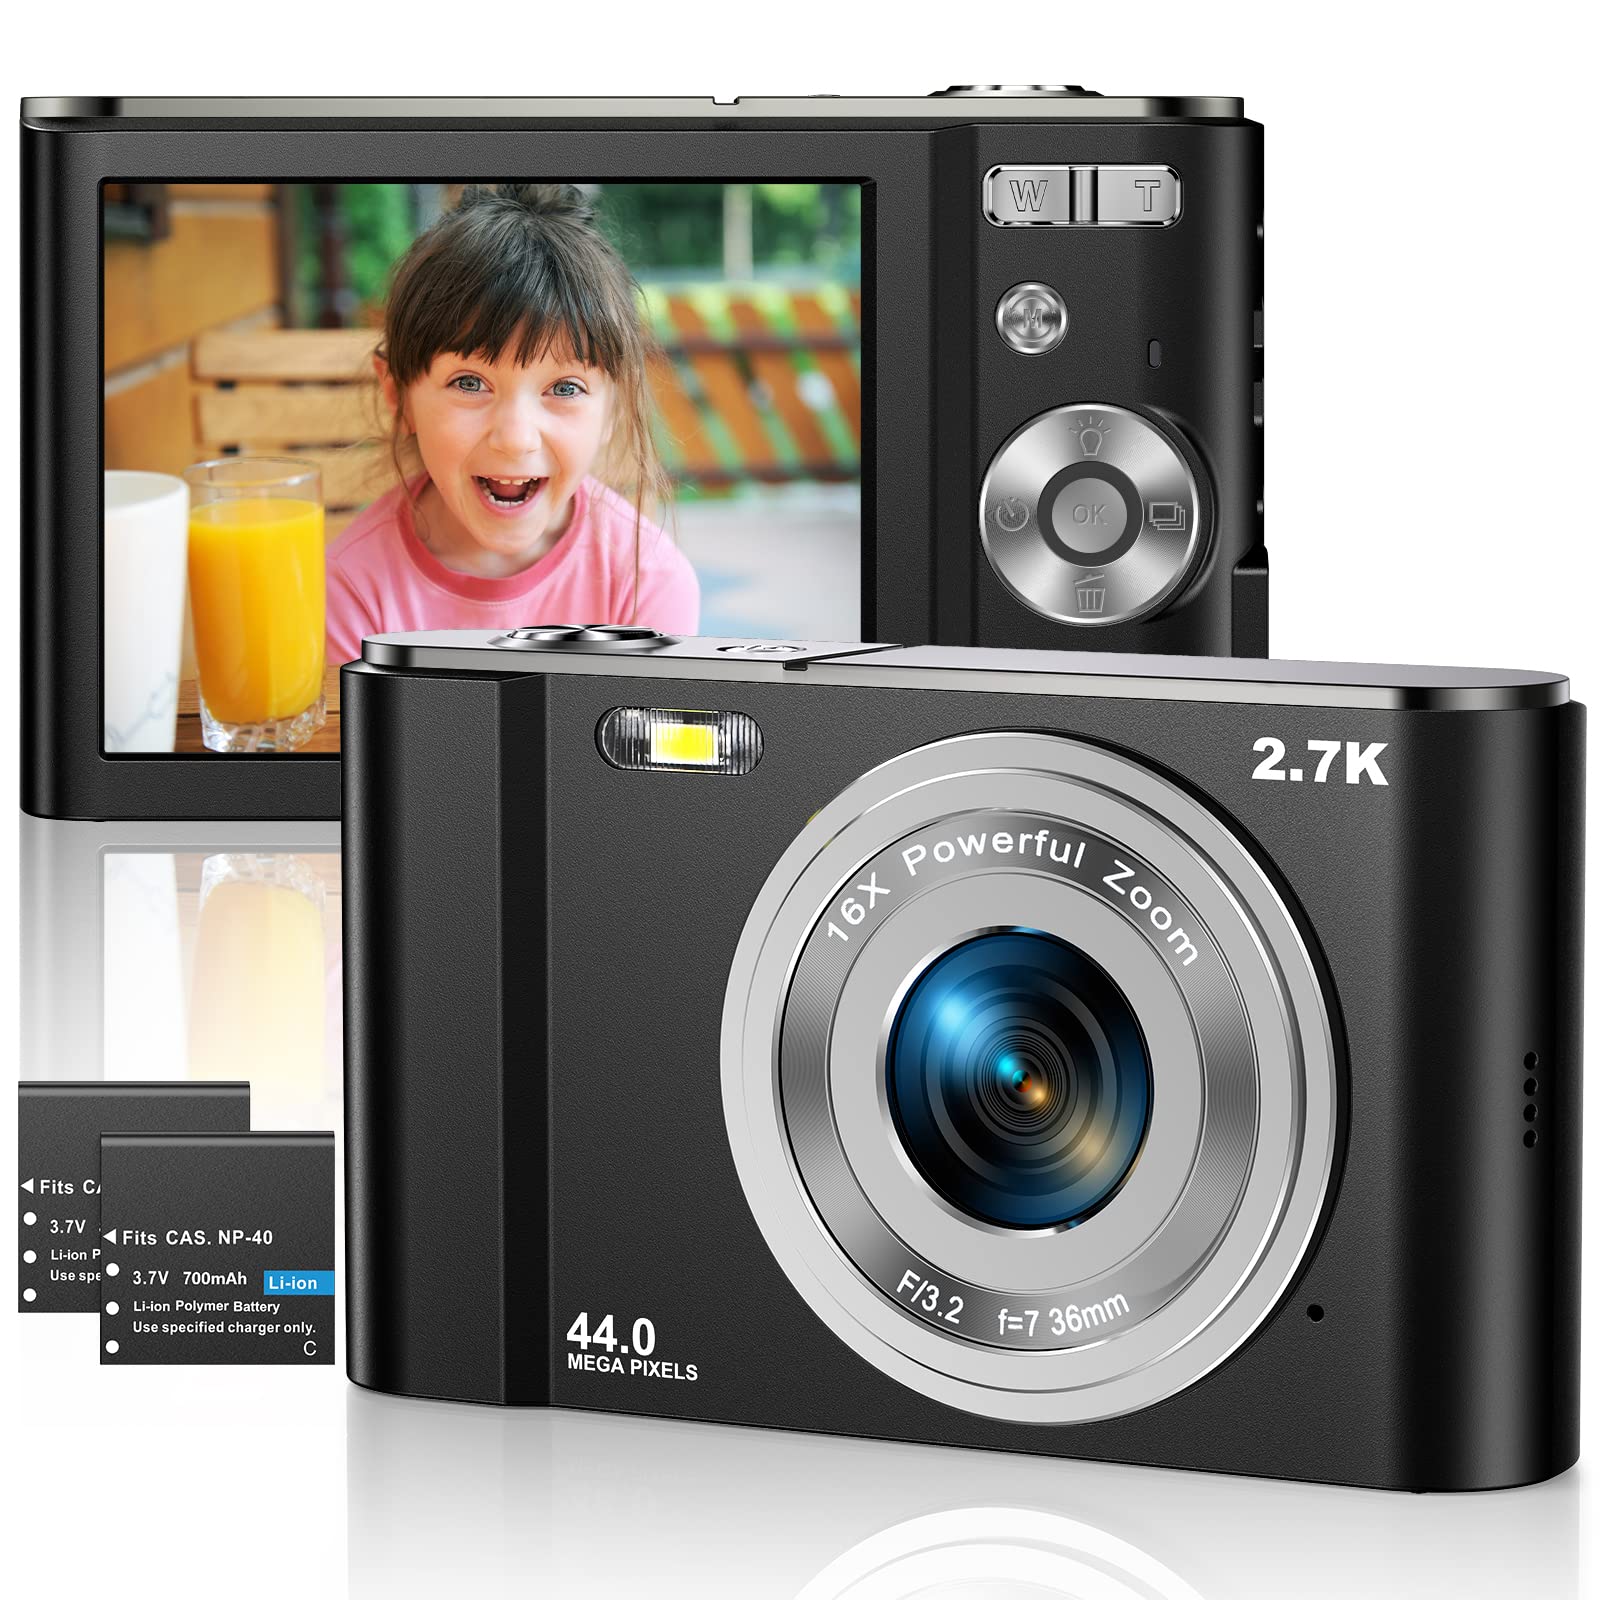 Digital Camera 2.7K Ultra HD Mini Camera 44MP 2.8 Inch LCD Screen Rechargeable Students, Compact Pocket Camera with 16X Digital Zoom YouTube Vlogging Camera for Kids,Adult,Beginners(Black)